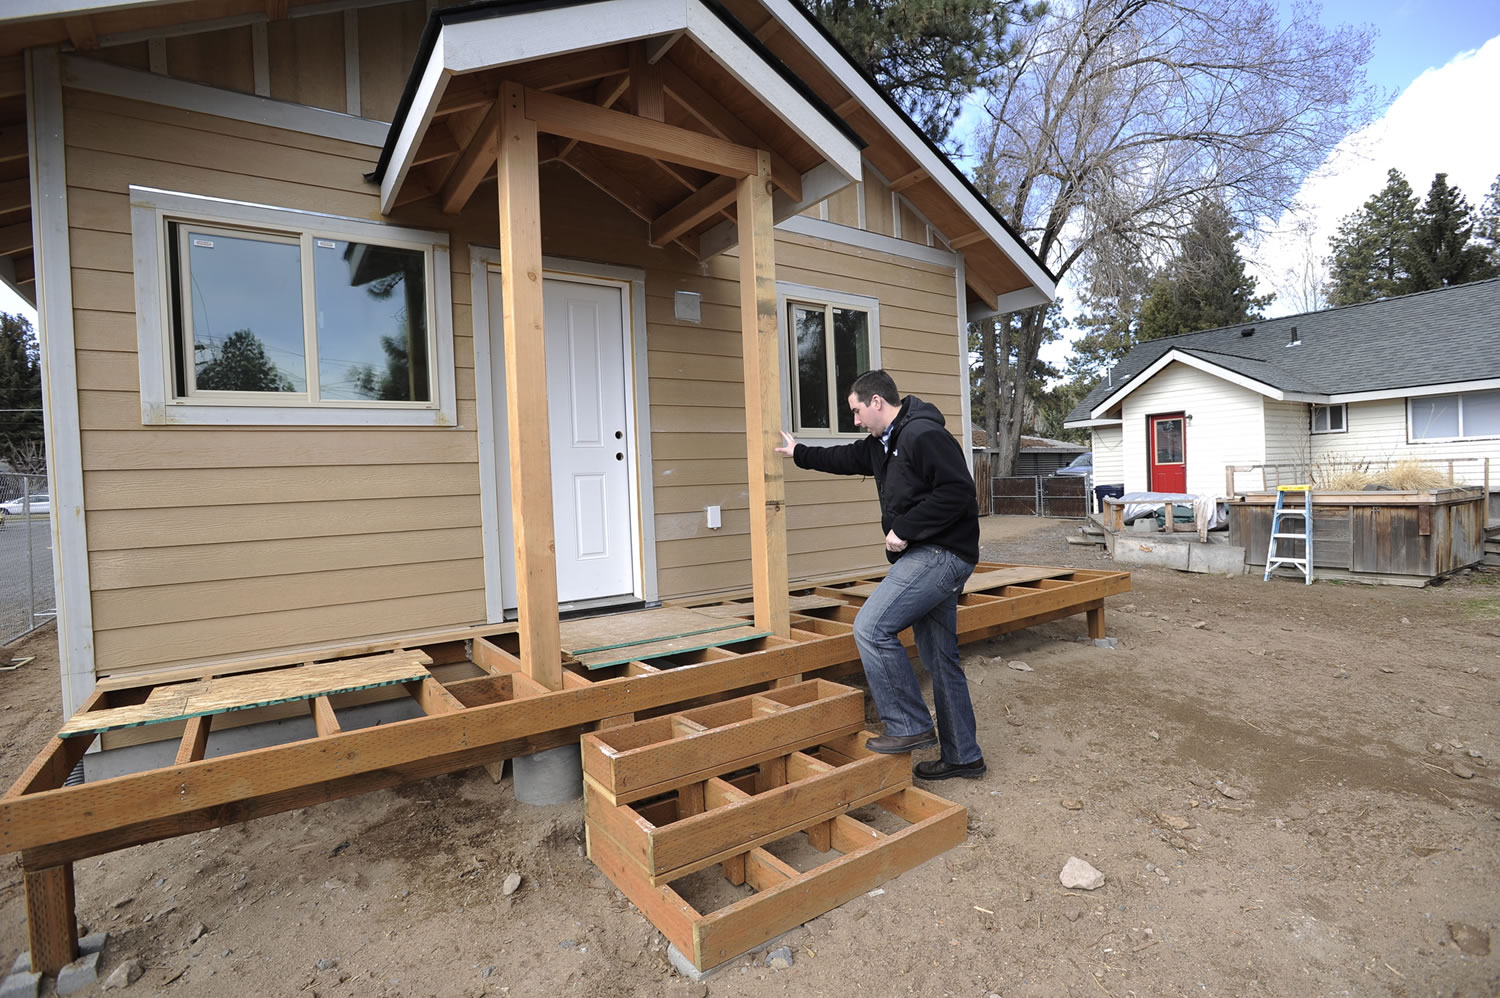 Ryan Davies walks into his accessory dwelling unit behind his home in Bend, Ore., on Thursday.